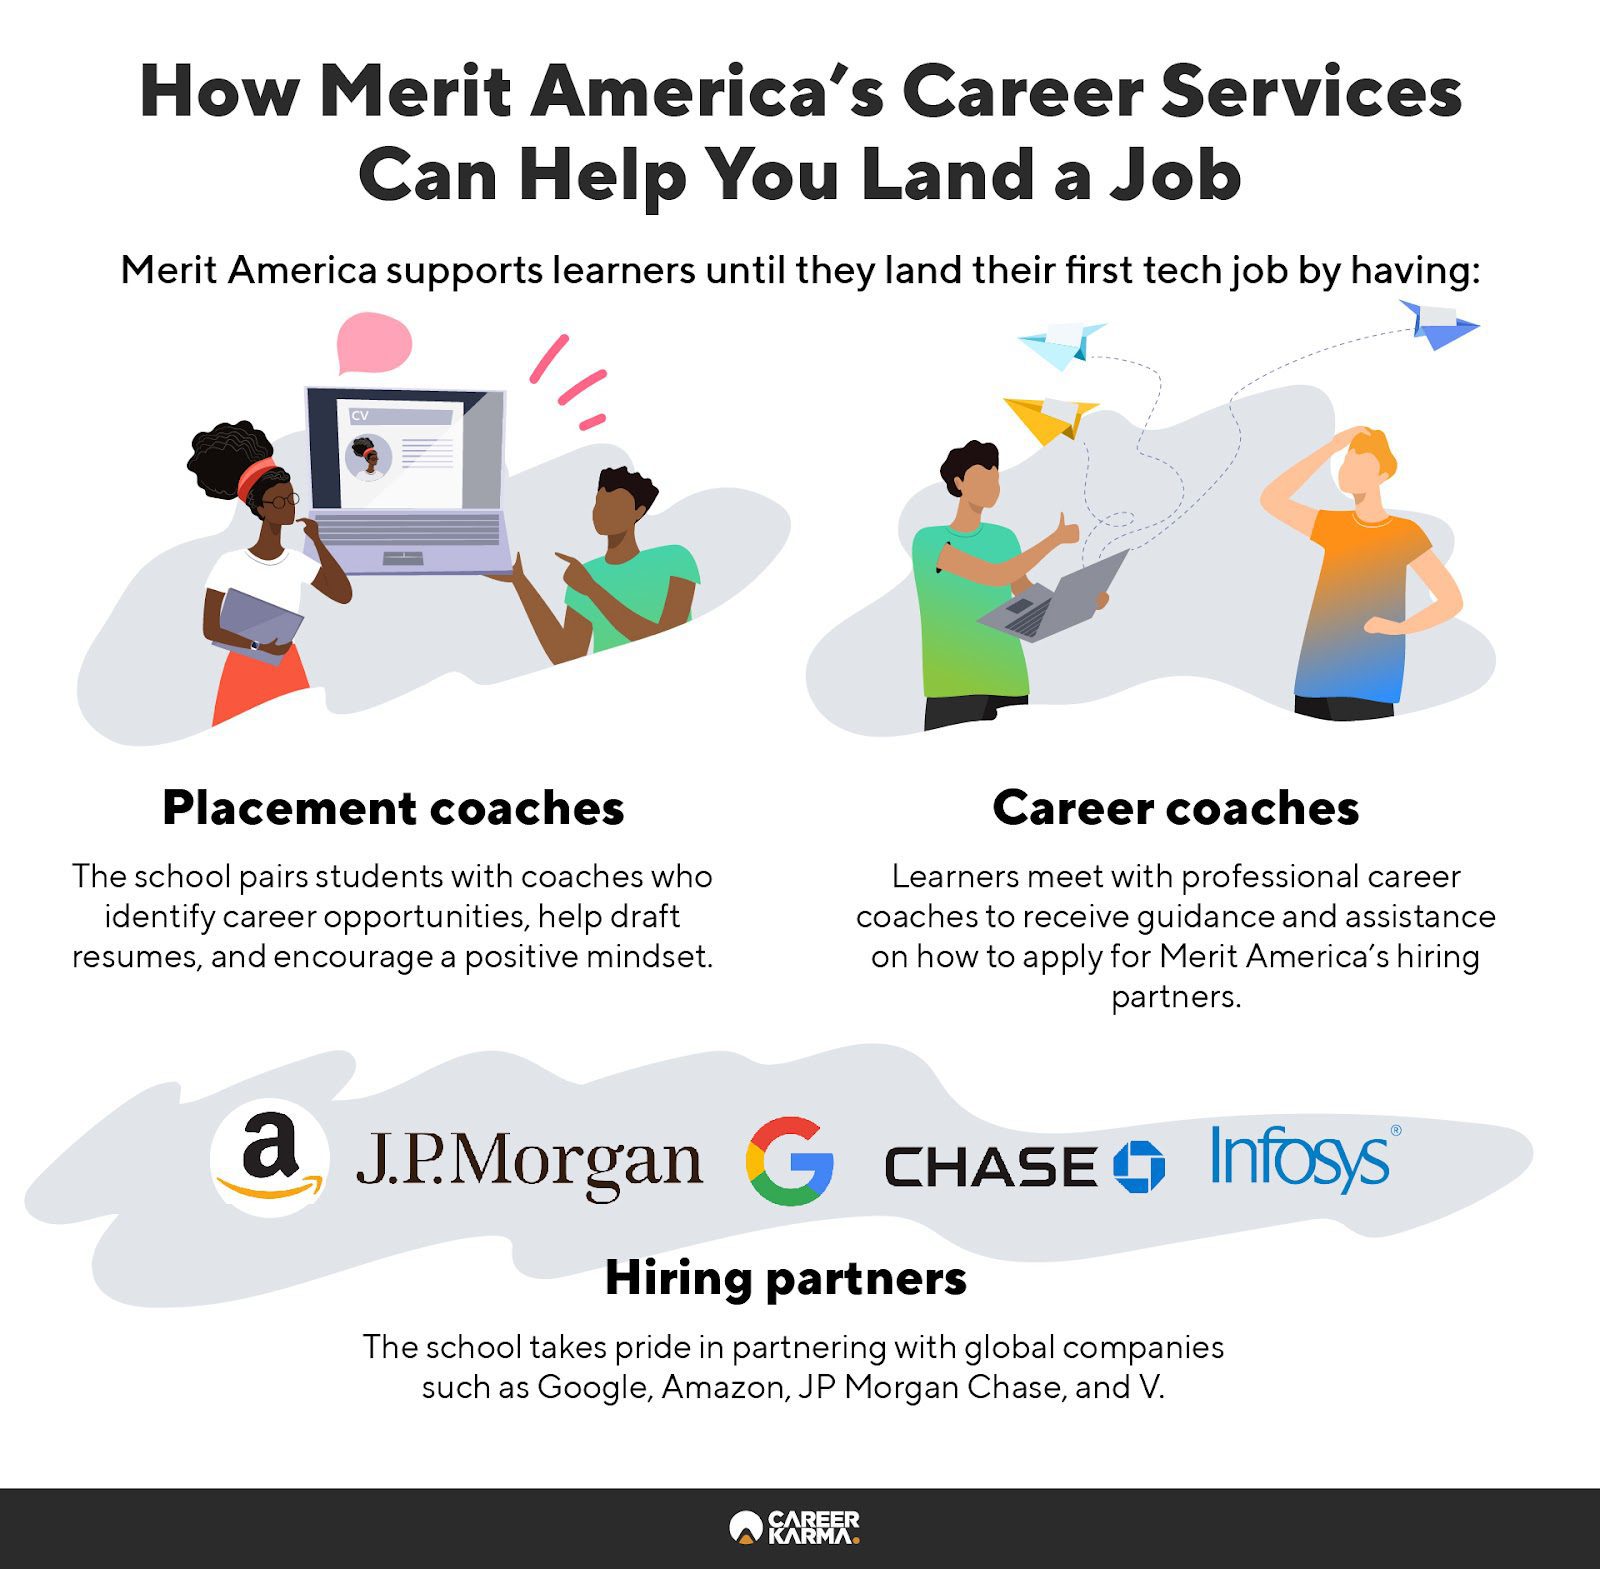 An infographic covering the vital members of Merit America’s career services team